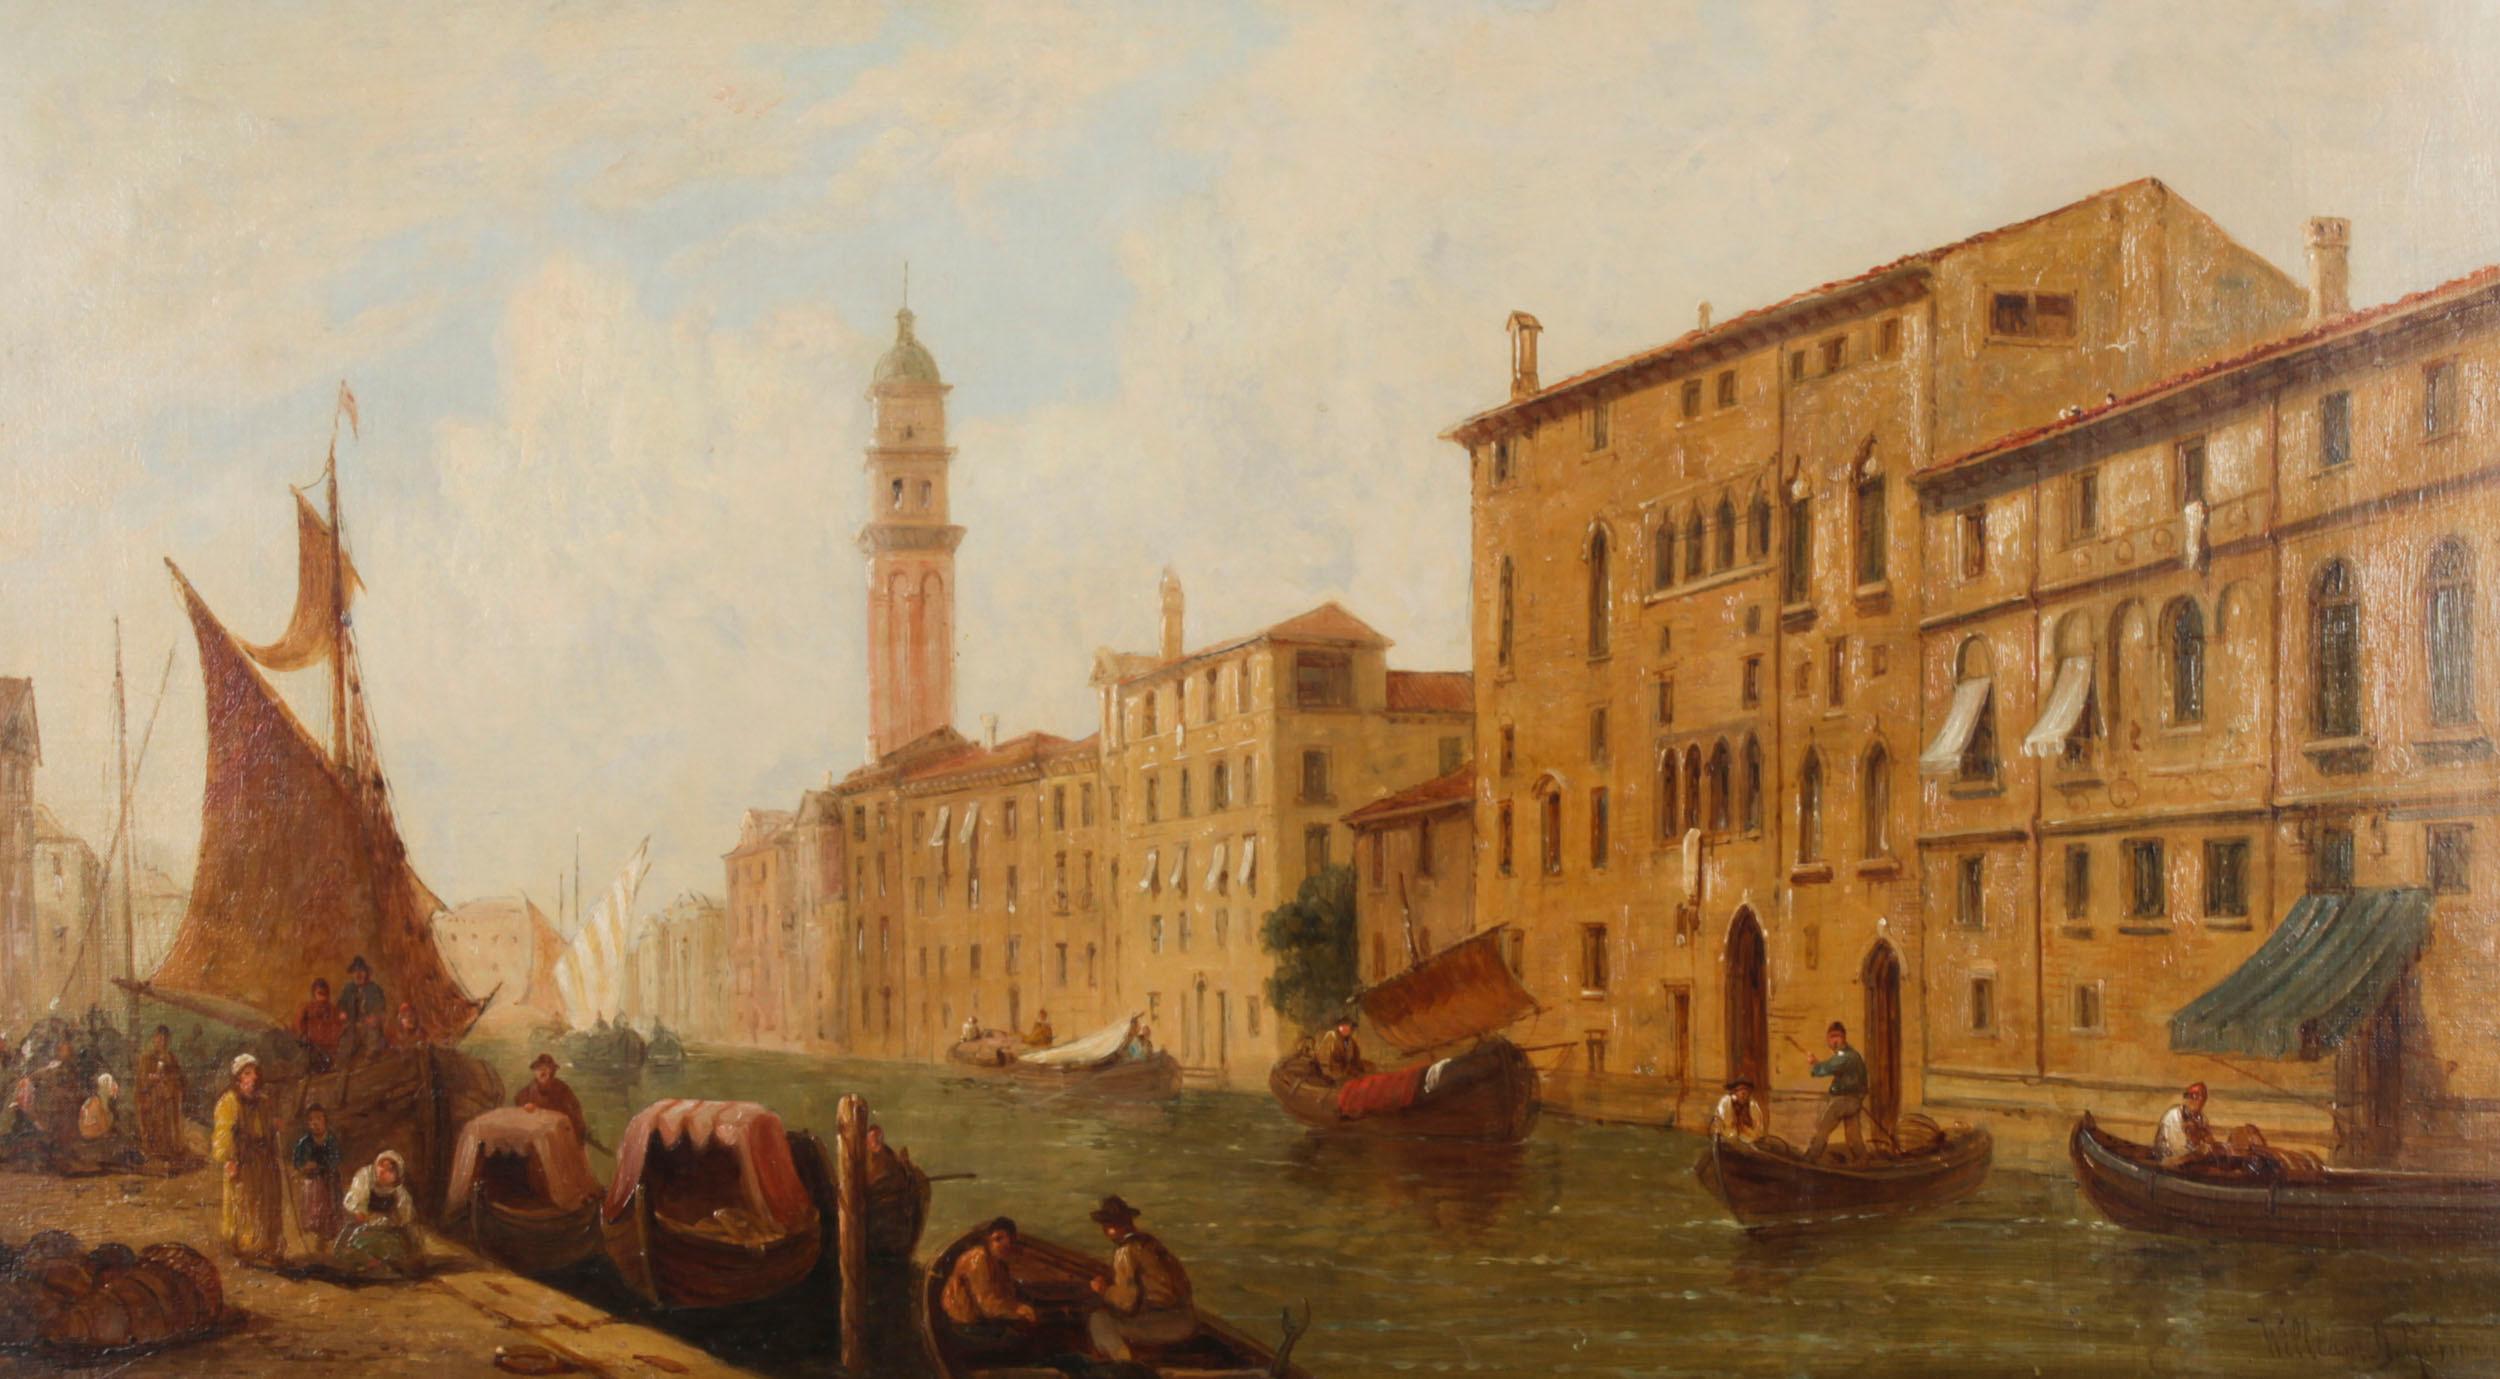 This is a beautiful oil on canvas painting of the view of the Ducal Palace and the entrance to the Piazza San Marco Canal in Venice by the renowned William Raymond Dommersen (1850 - 1927), signed lower right.

William Raymond Dommersen came from a